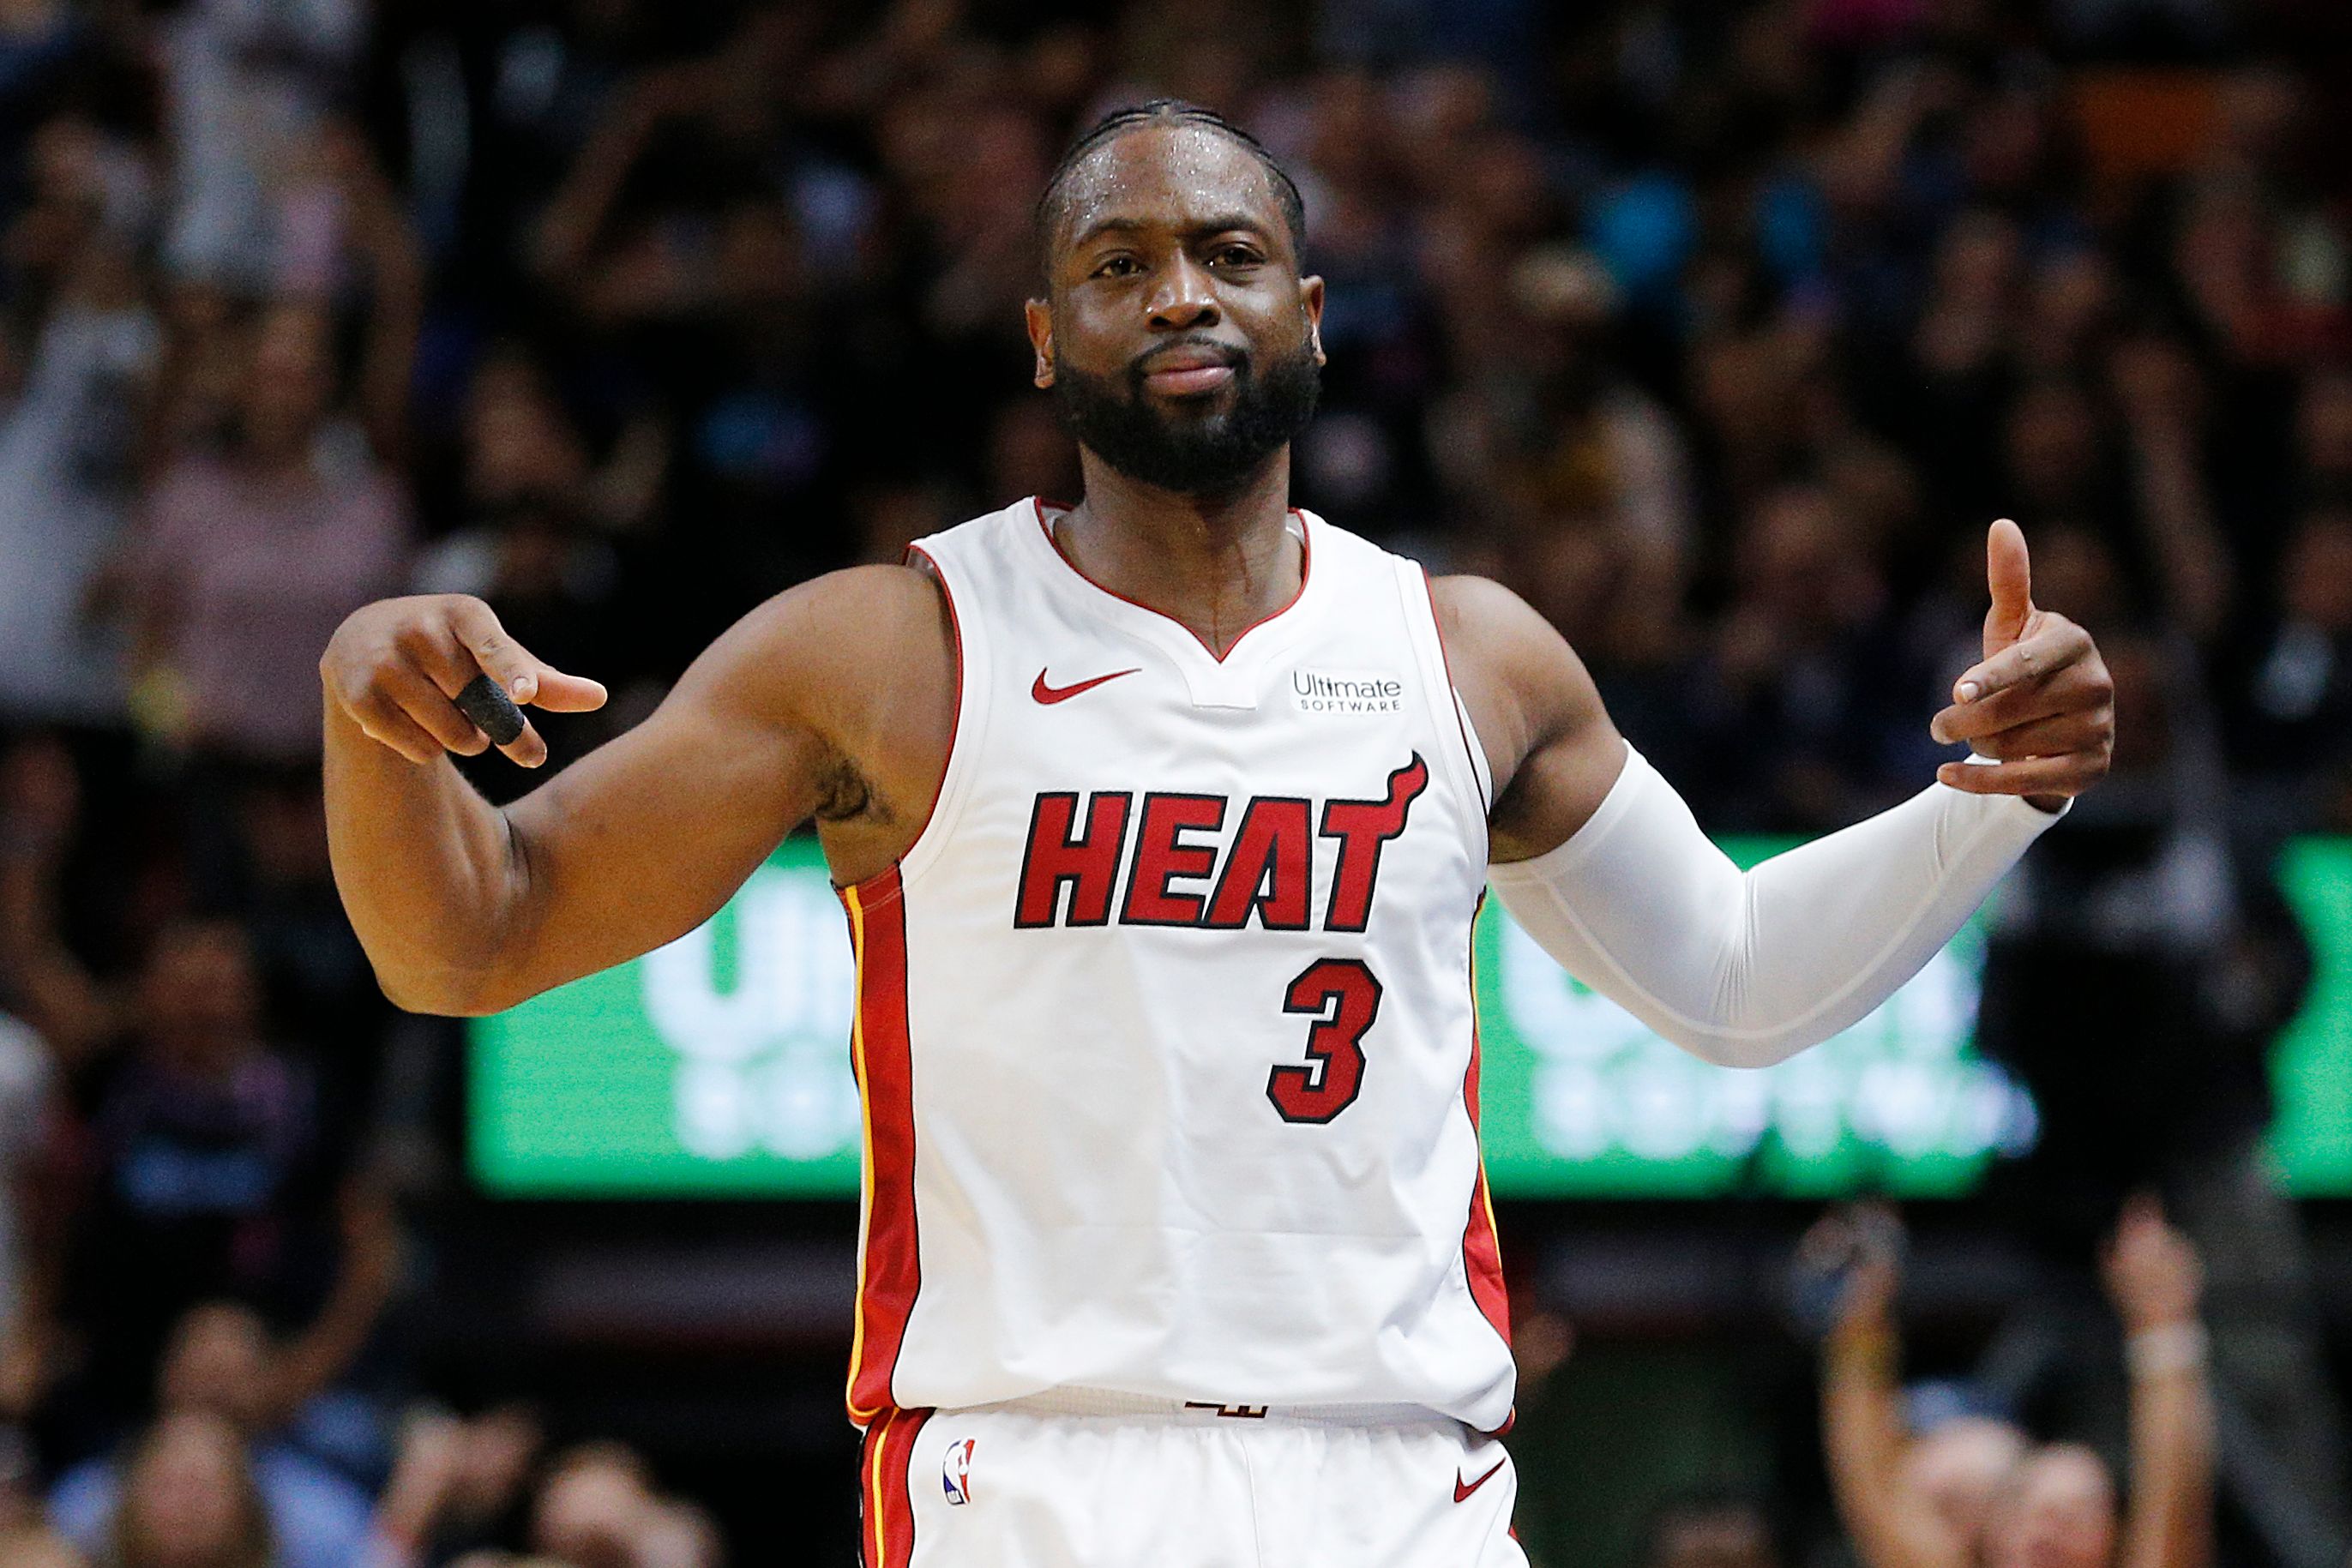 Dwyane Wade during the second half of a game at the American Airlines Arena on April 09, 2019 in Miami, Florida. | Source: Getty Images